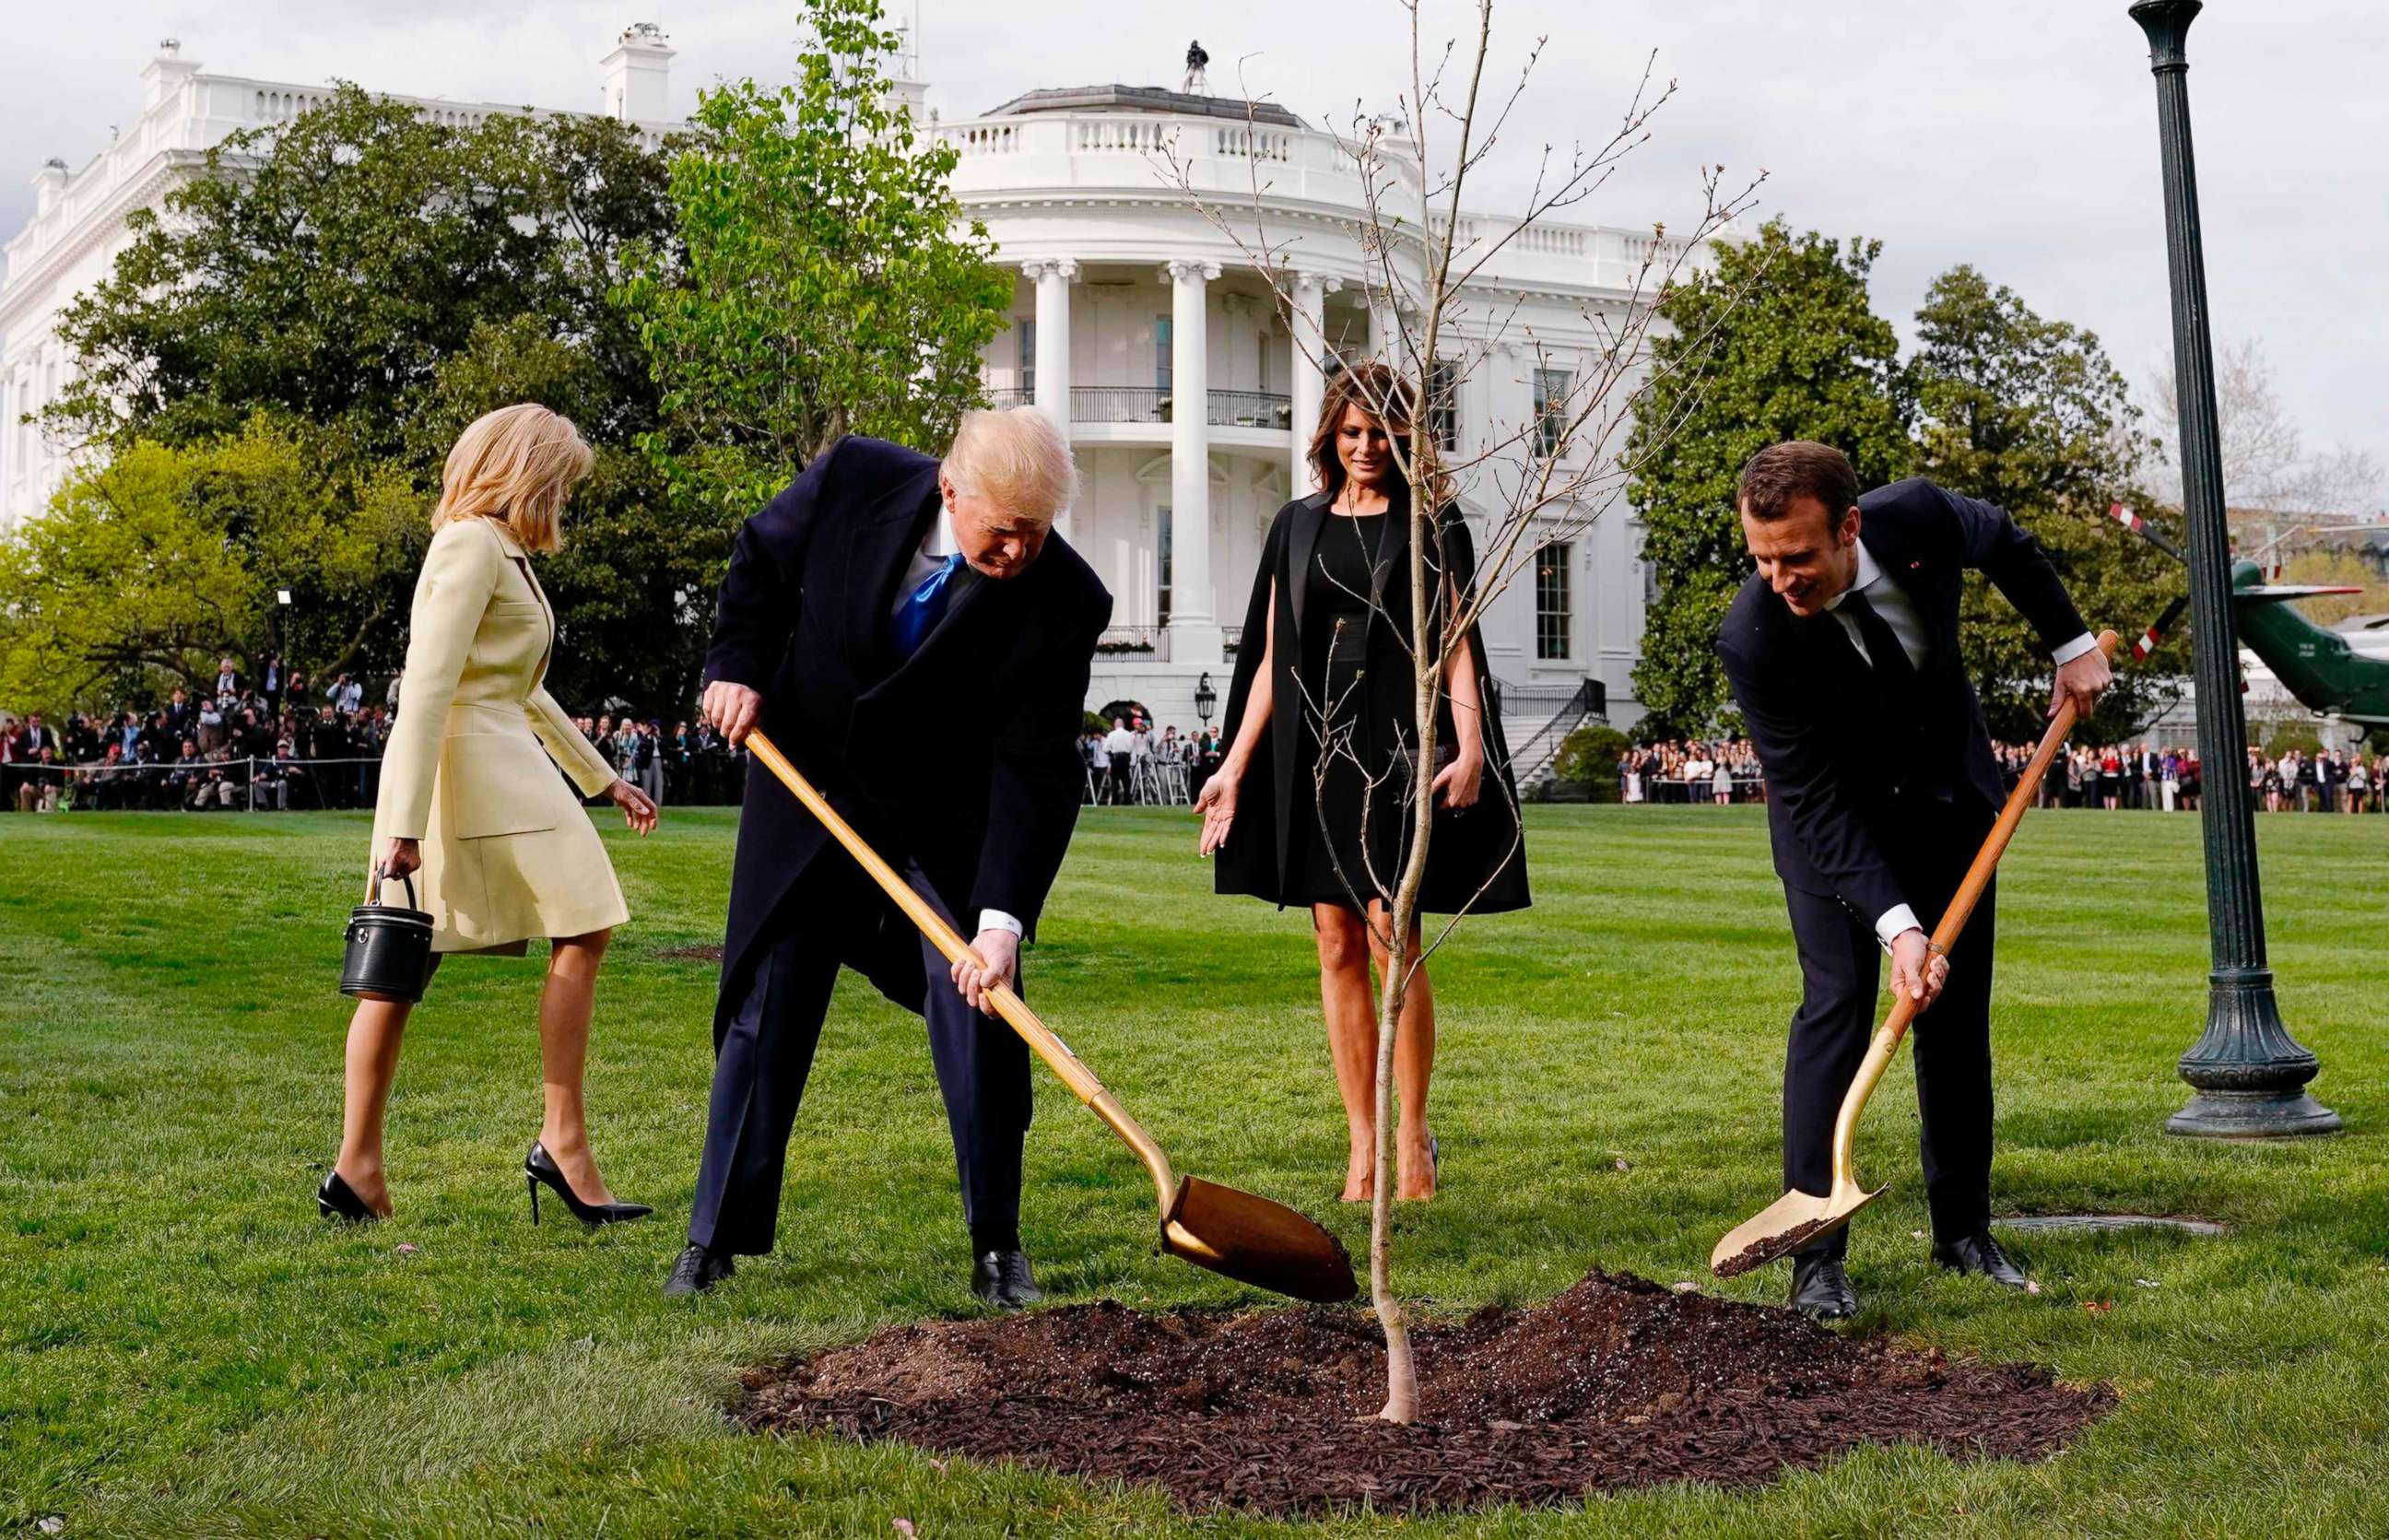 PHOTO: President Donald Trump and French President Emmanuel Macron shovel dirt onto a freshly planted oak tree as first lady Melania Trump and Brigitte Macron watch on the South Lawn of the White House in Washington, D.C., April 23, 2018.